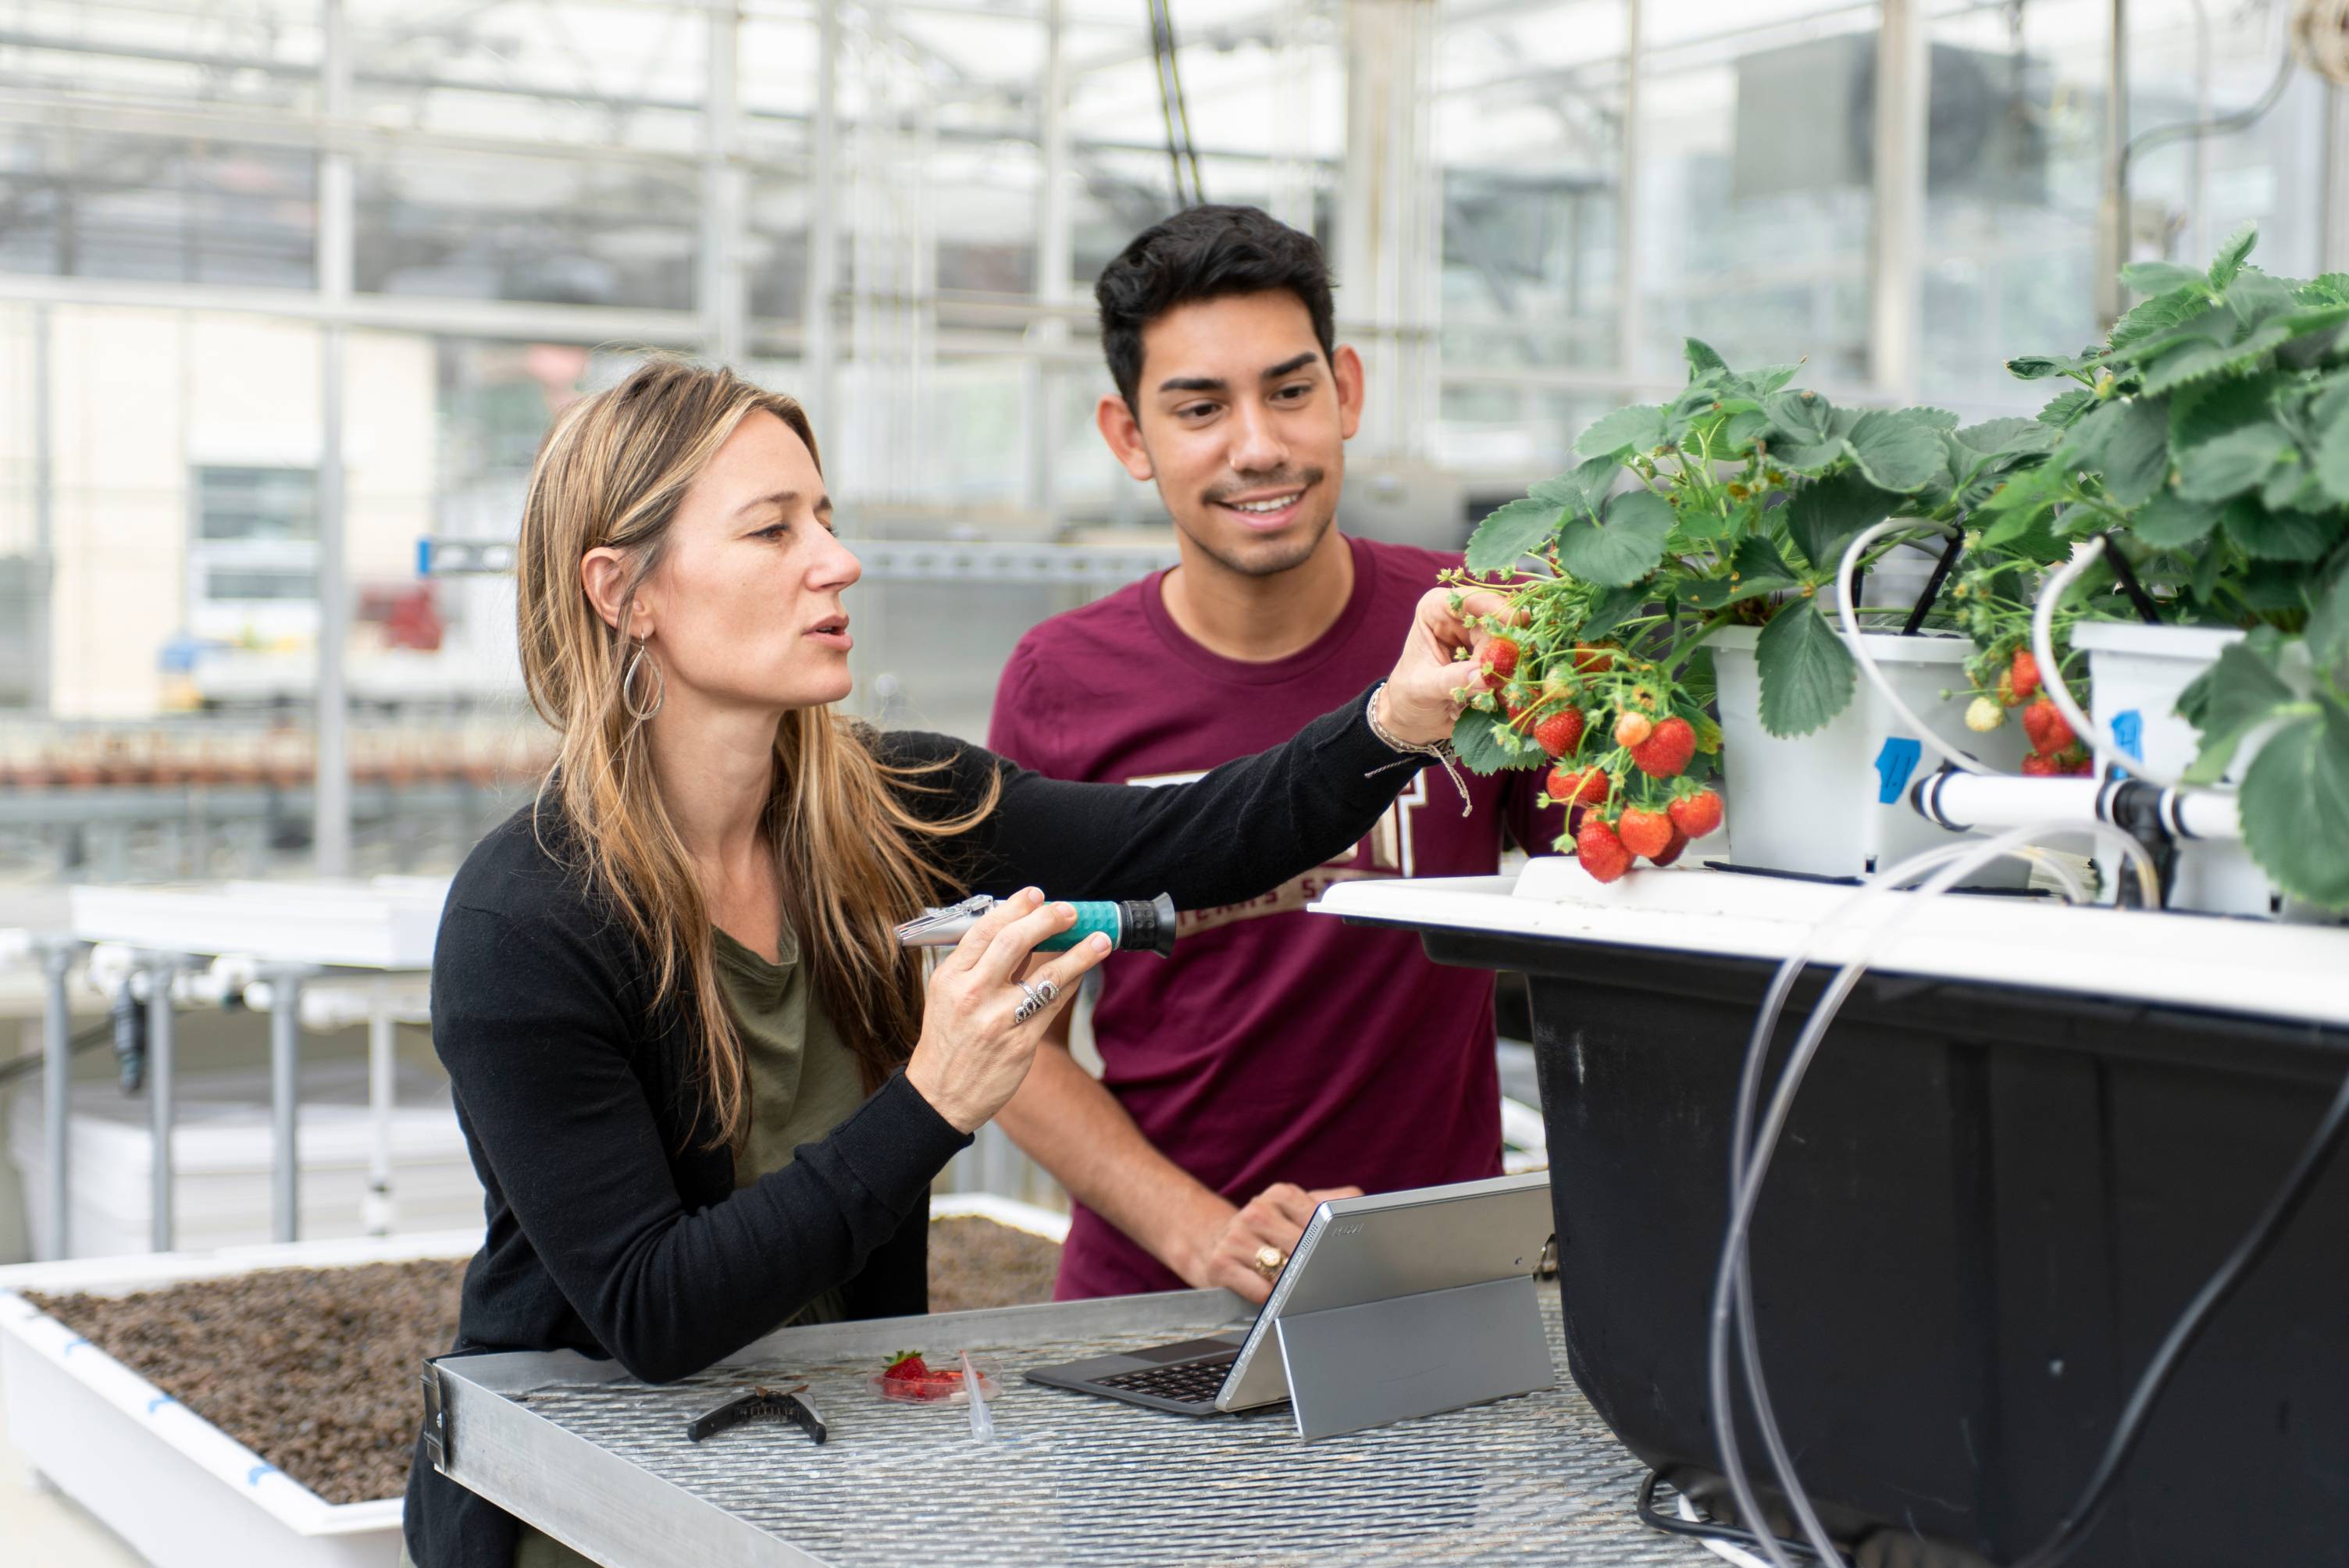 student watching professional tend to strawberries in a greenhouse